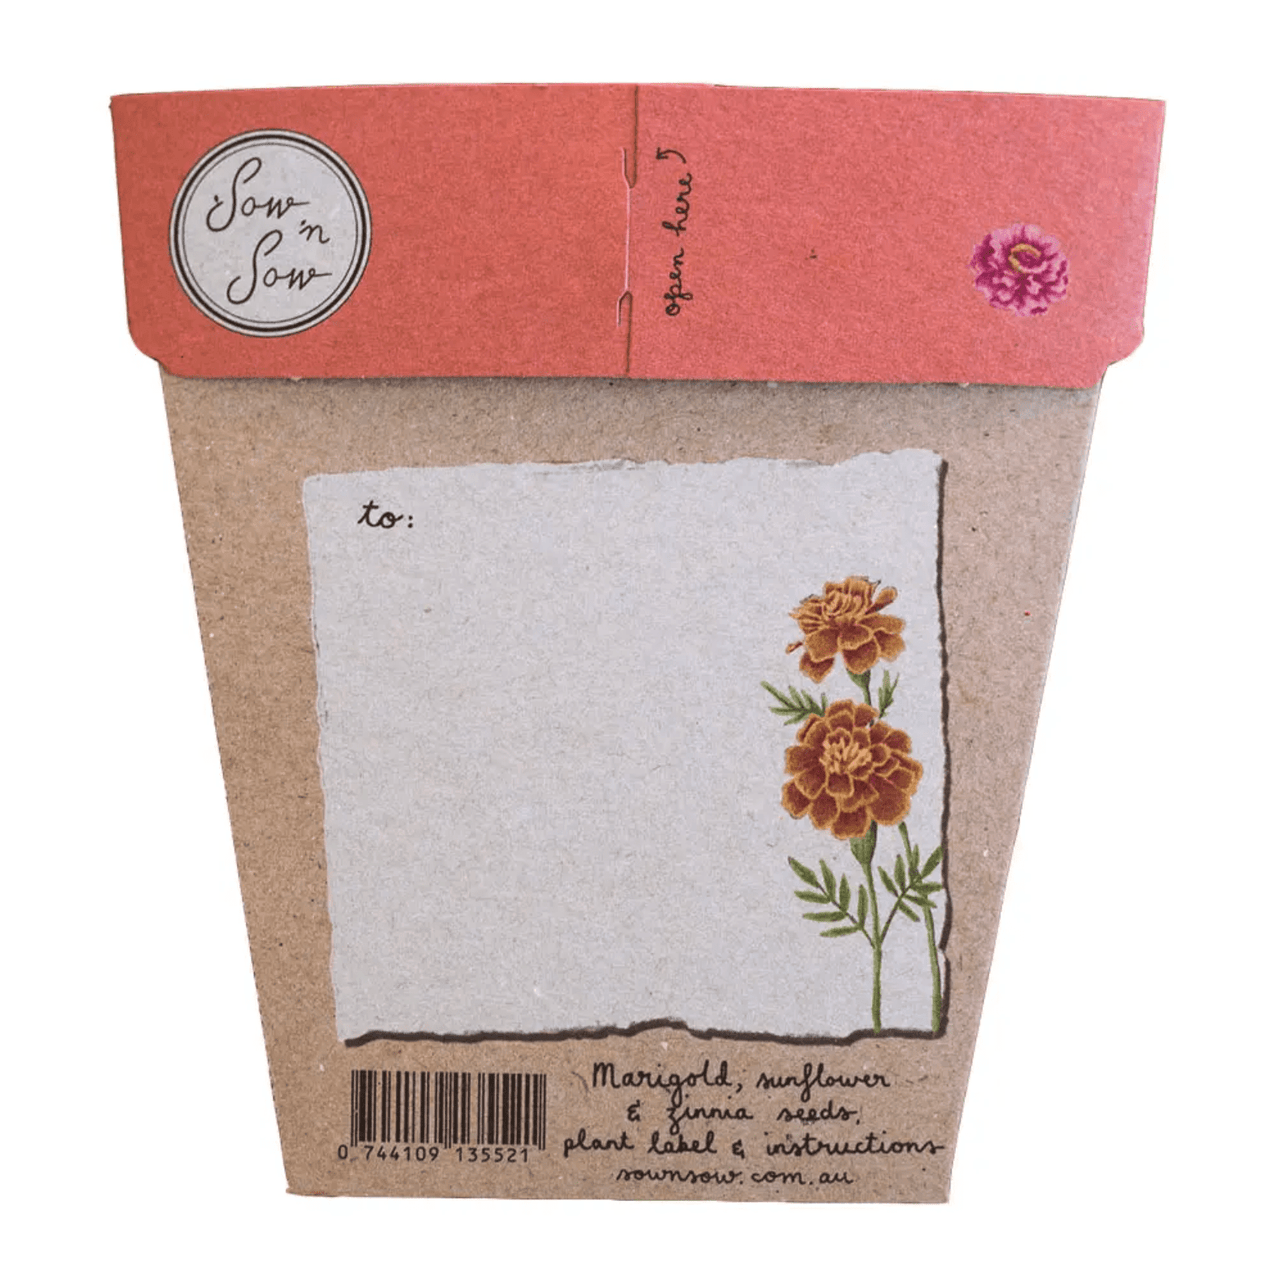 A flower pot with a note on it that contains Seeds - Secret Garden by Sow n Sow.